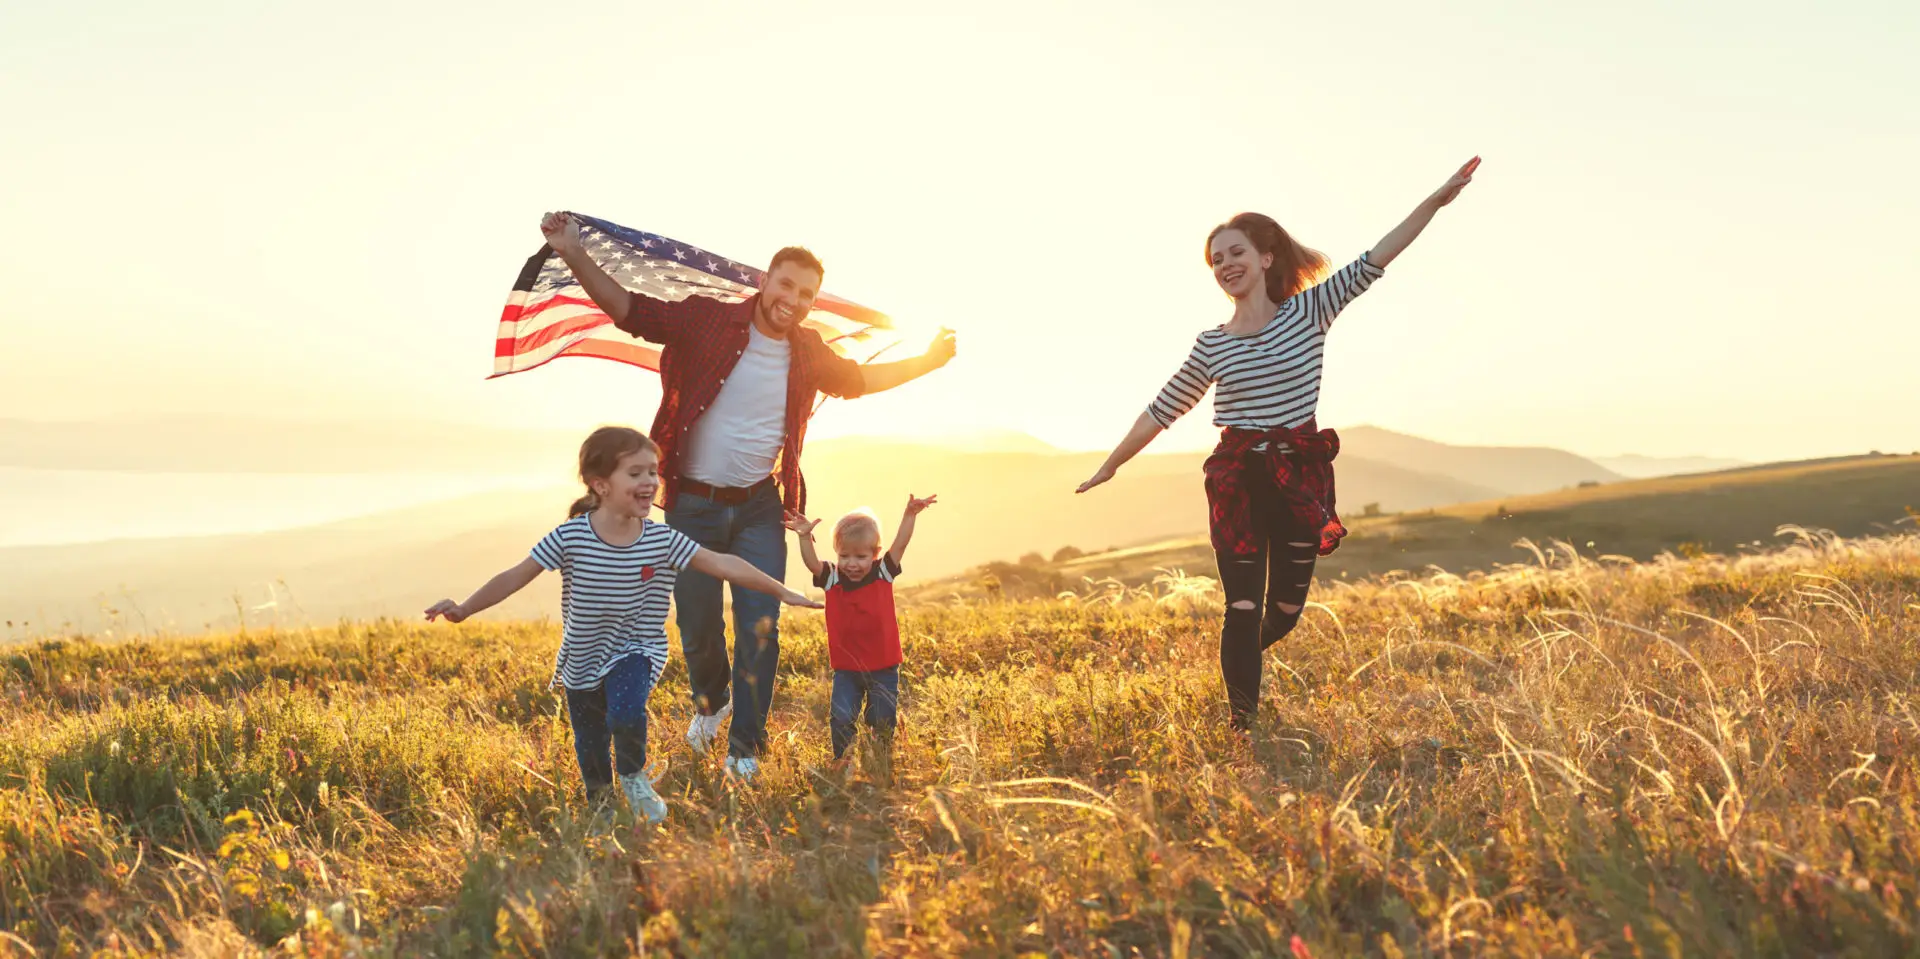 Family of four with an American flag running through a golden field